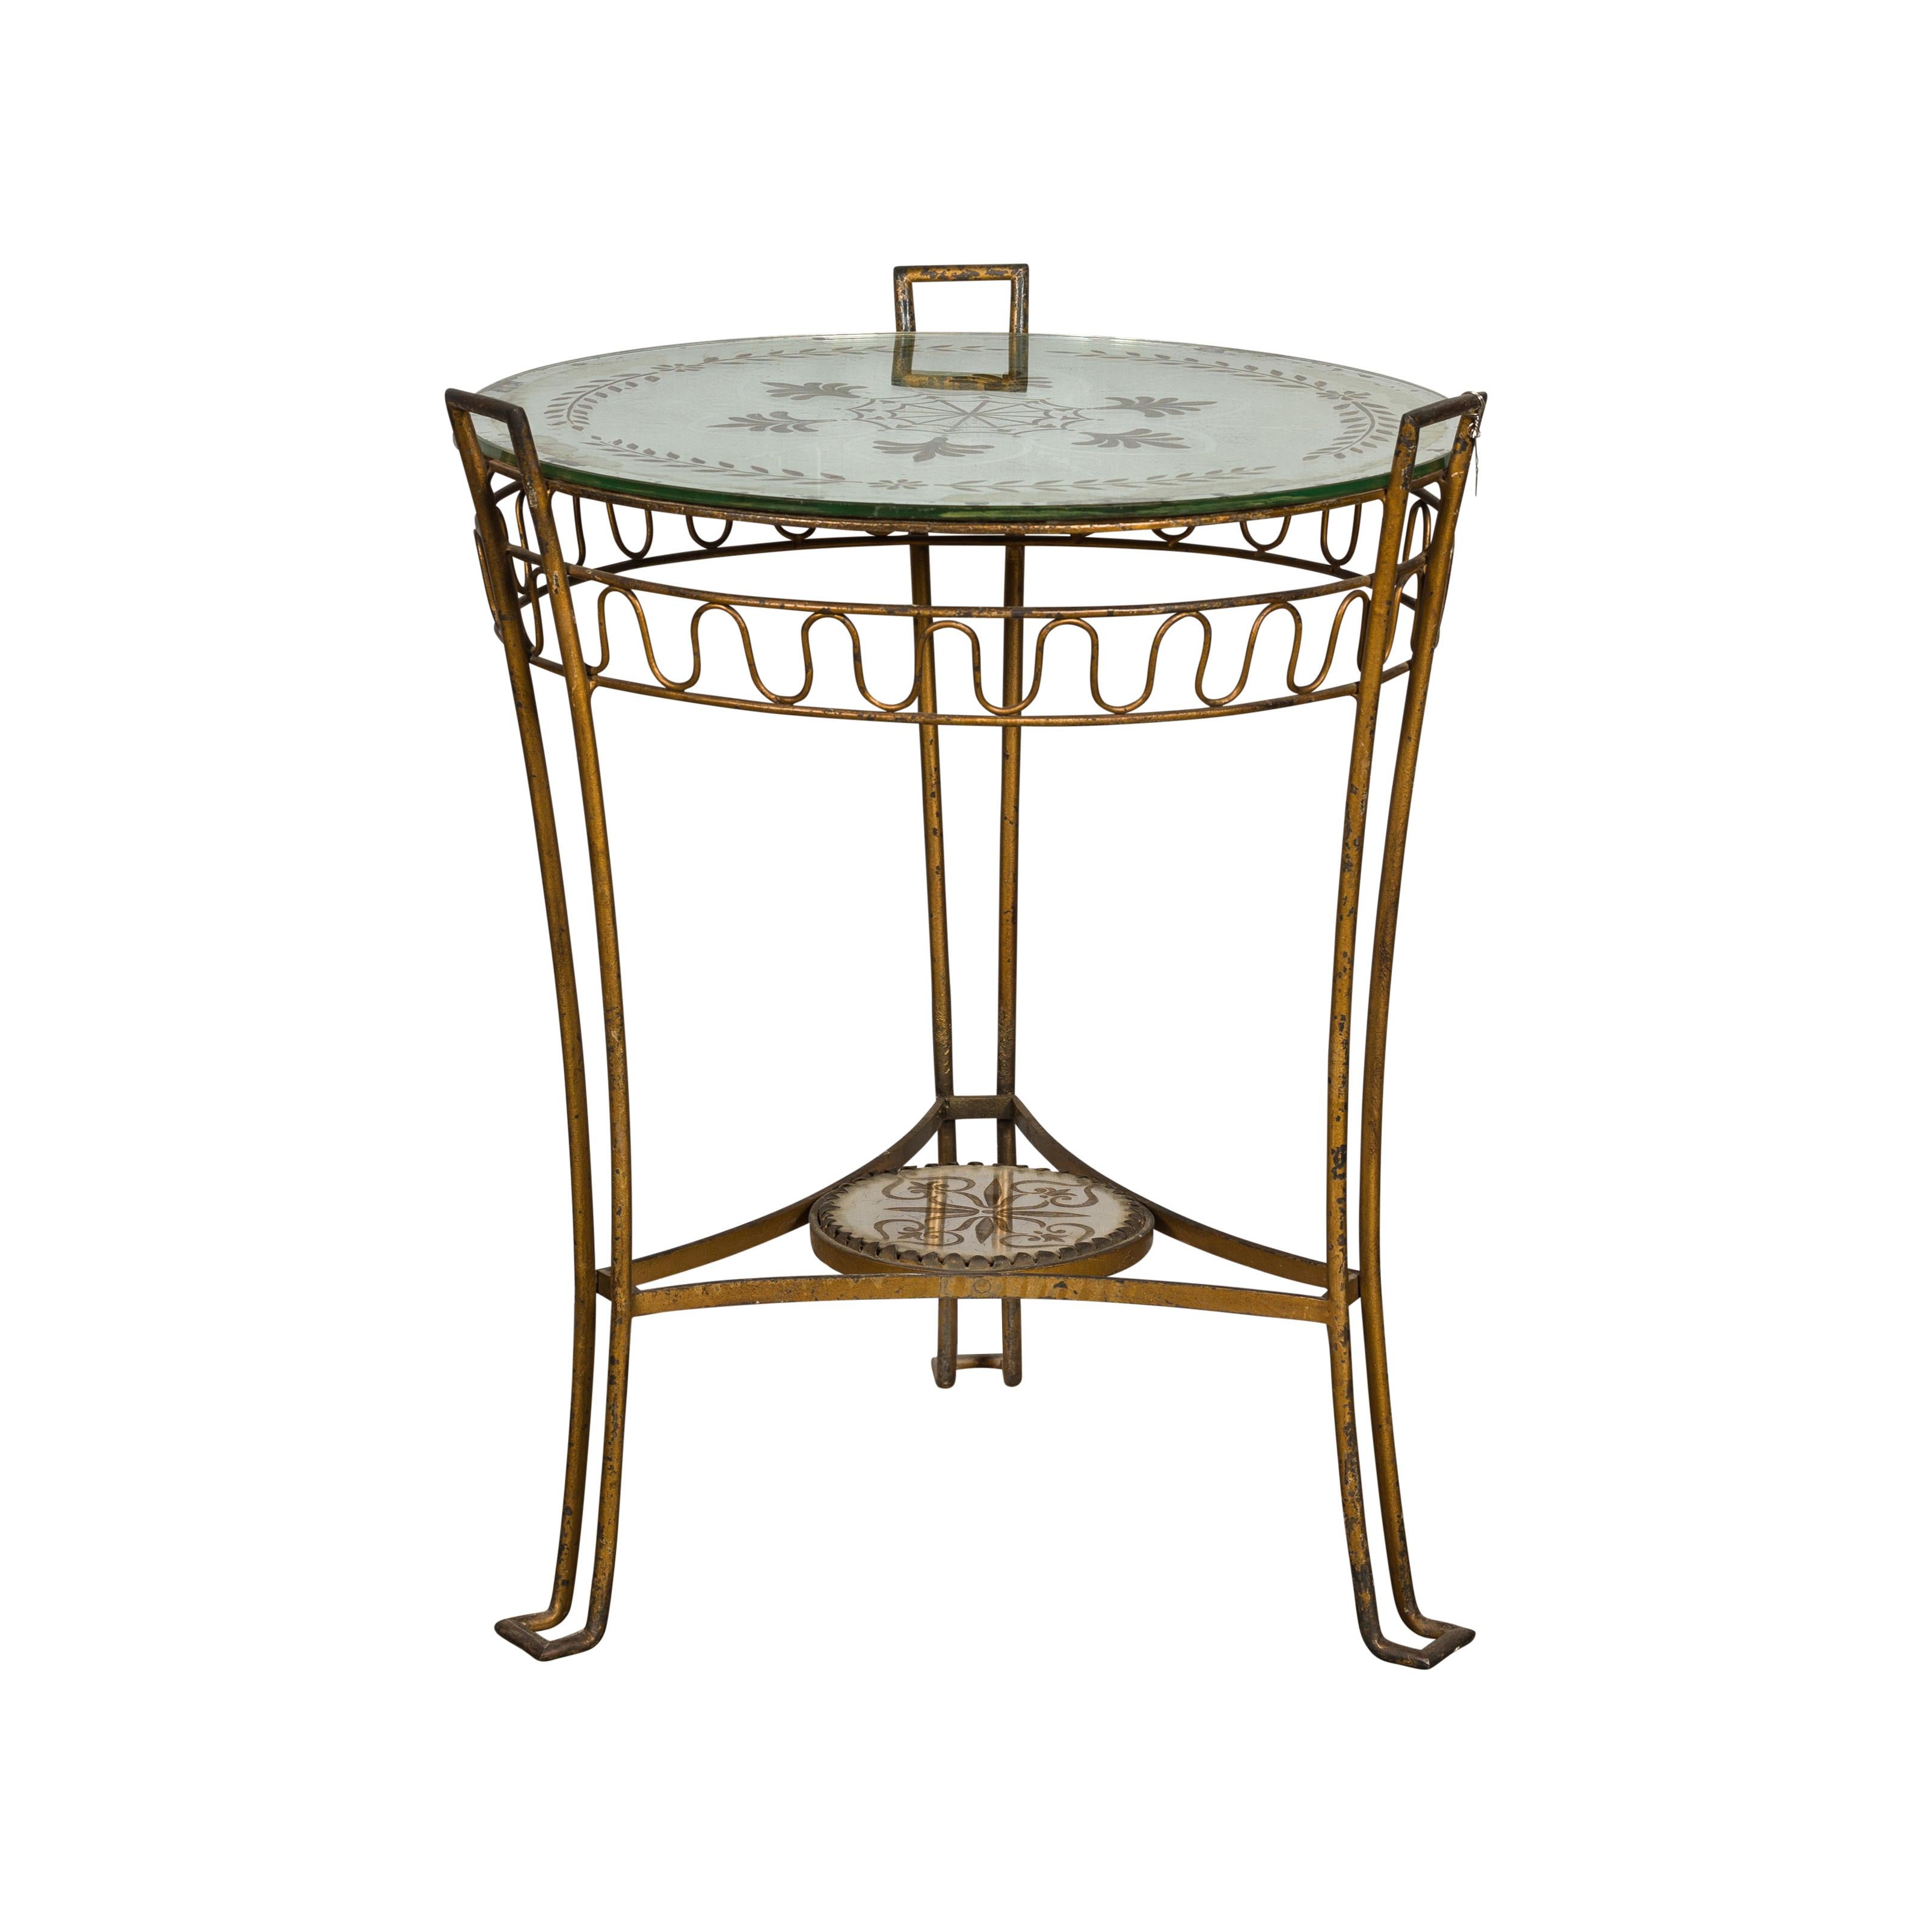 French 1920s Gilt Iron Side Table with Etched Foliage Mirrored Top and Low Shelf For Sale 12